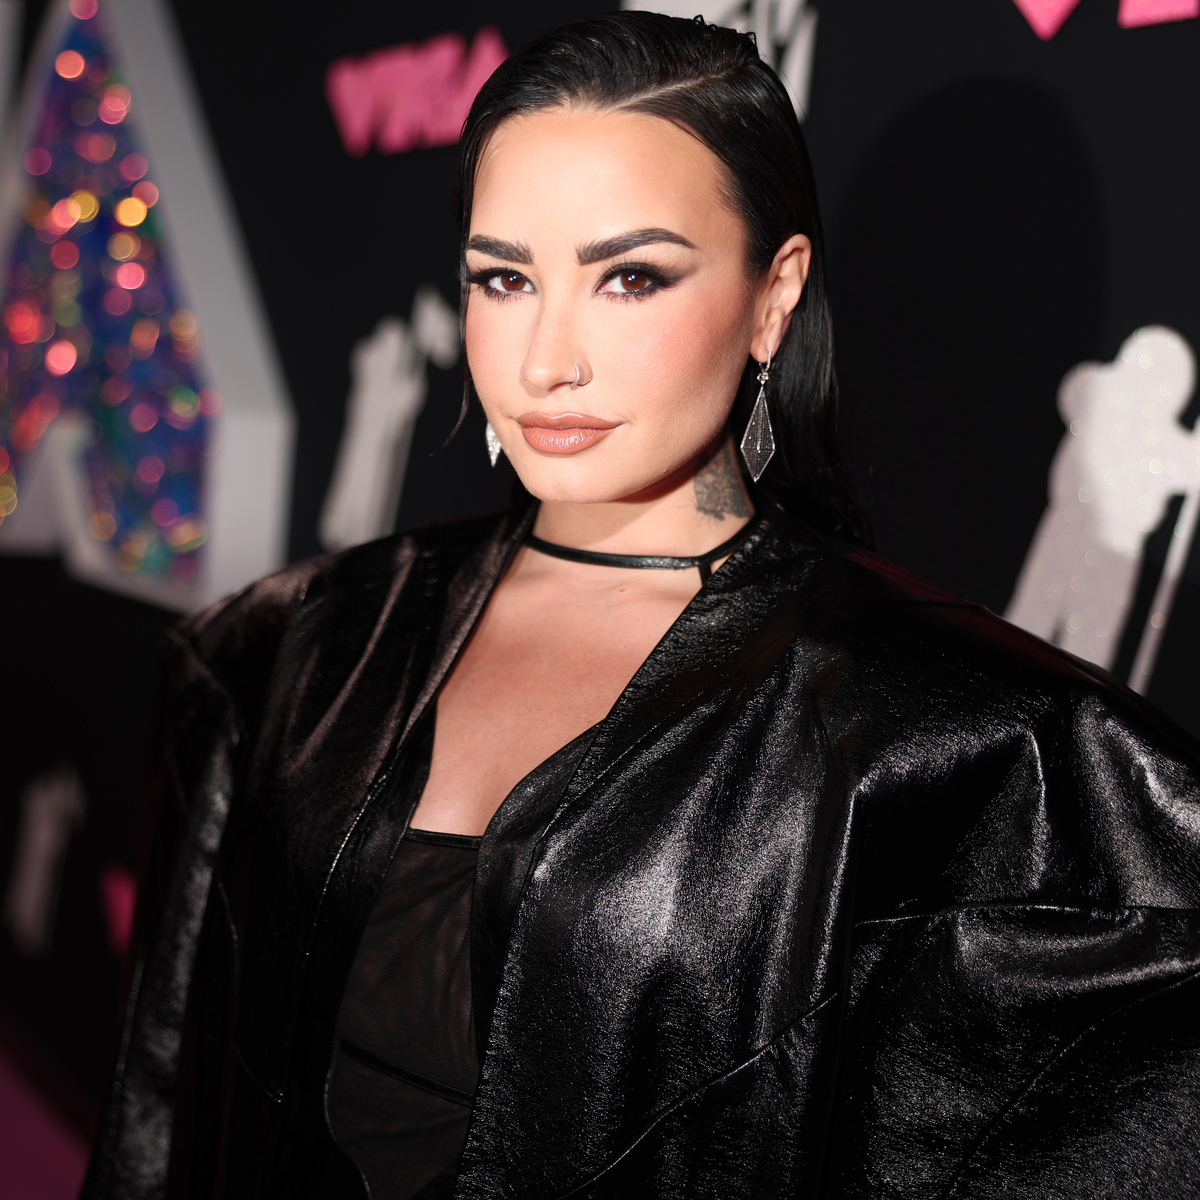 Why Demi Lovato Feels the “Most Confident” When She’s Having Sex